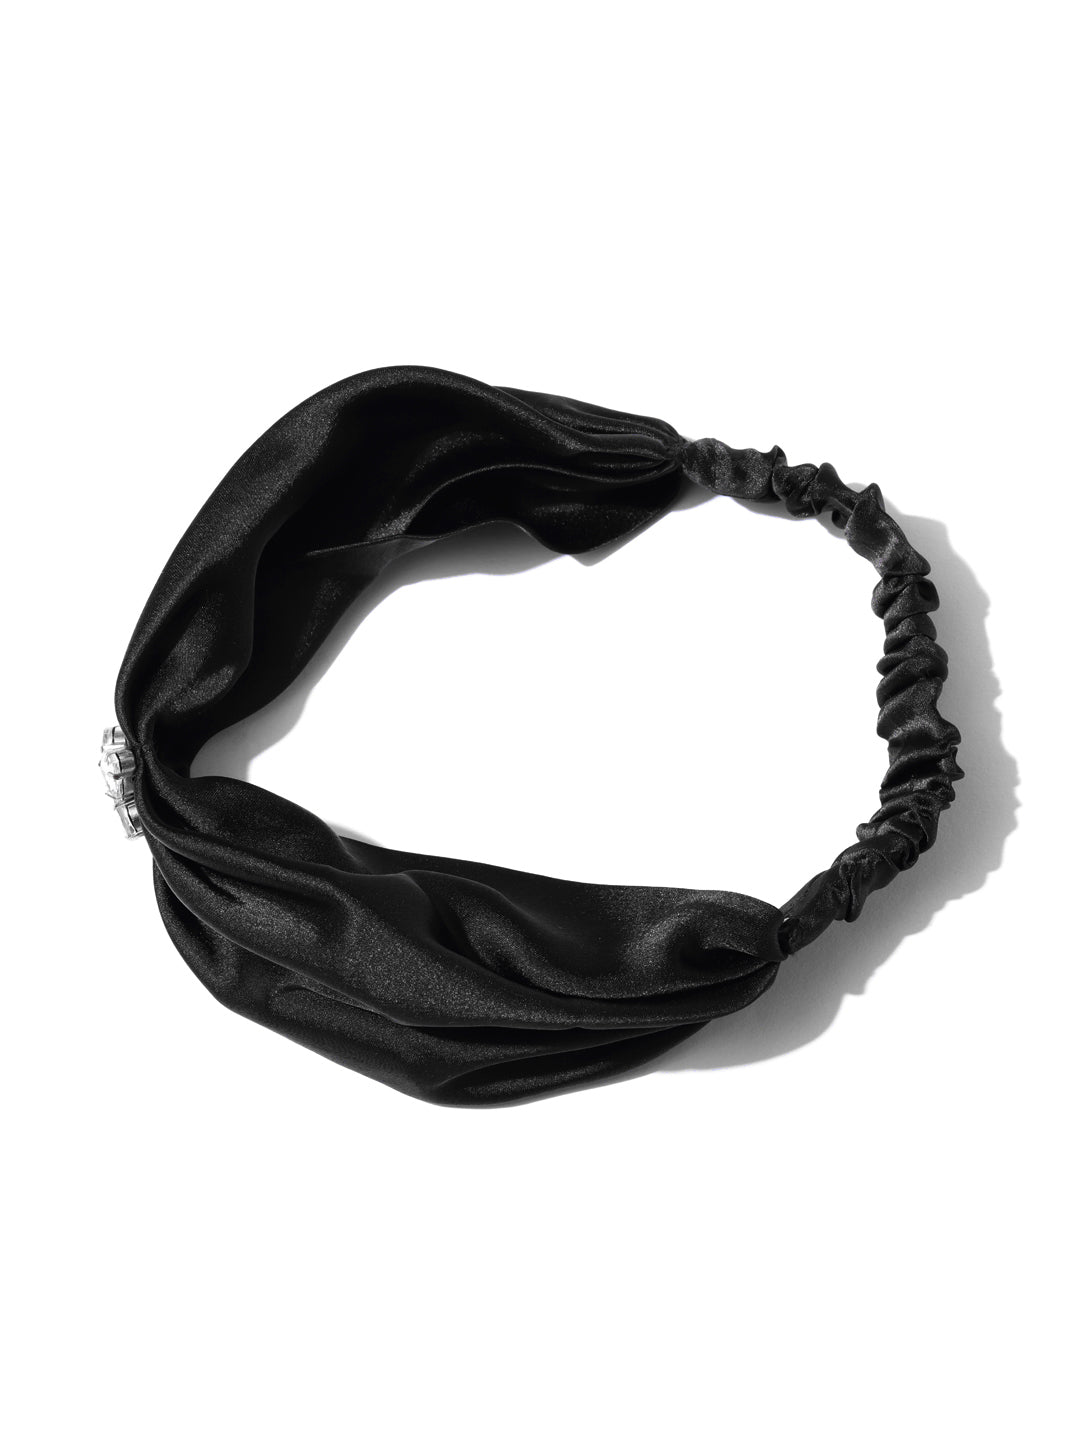 Blueberry black color stone detailing hair band